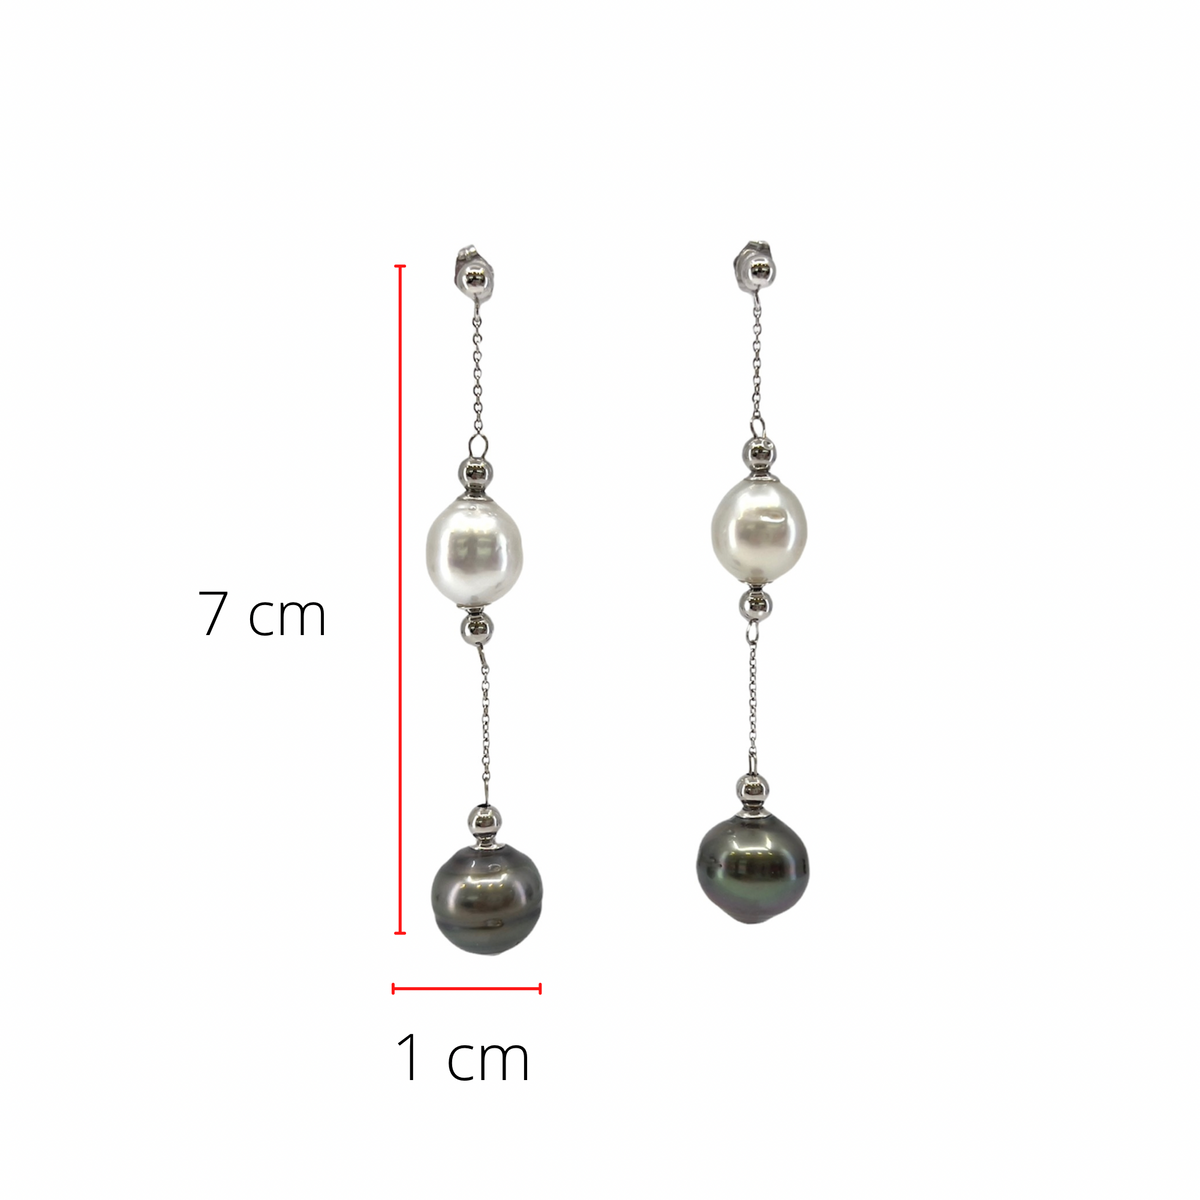 14K White Gold South Sea and Tahitian Pearl Earrings with Butterfly Backs